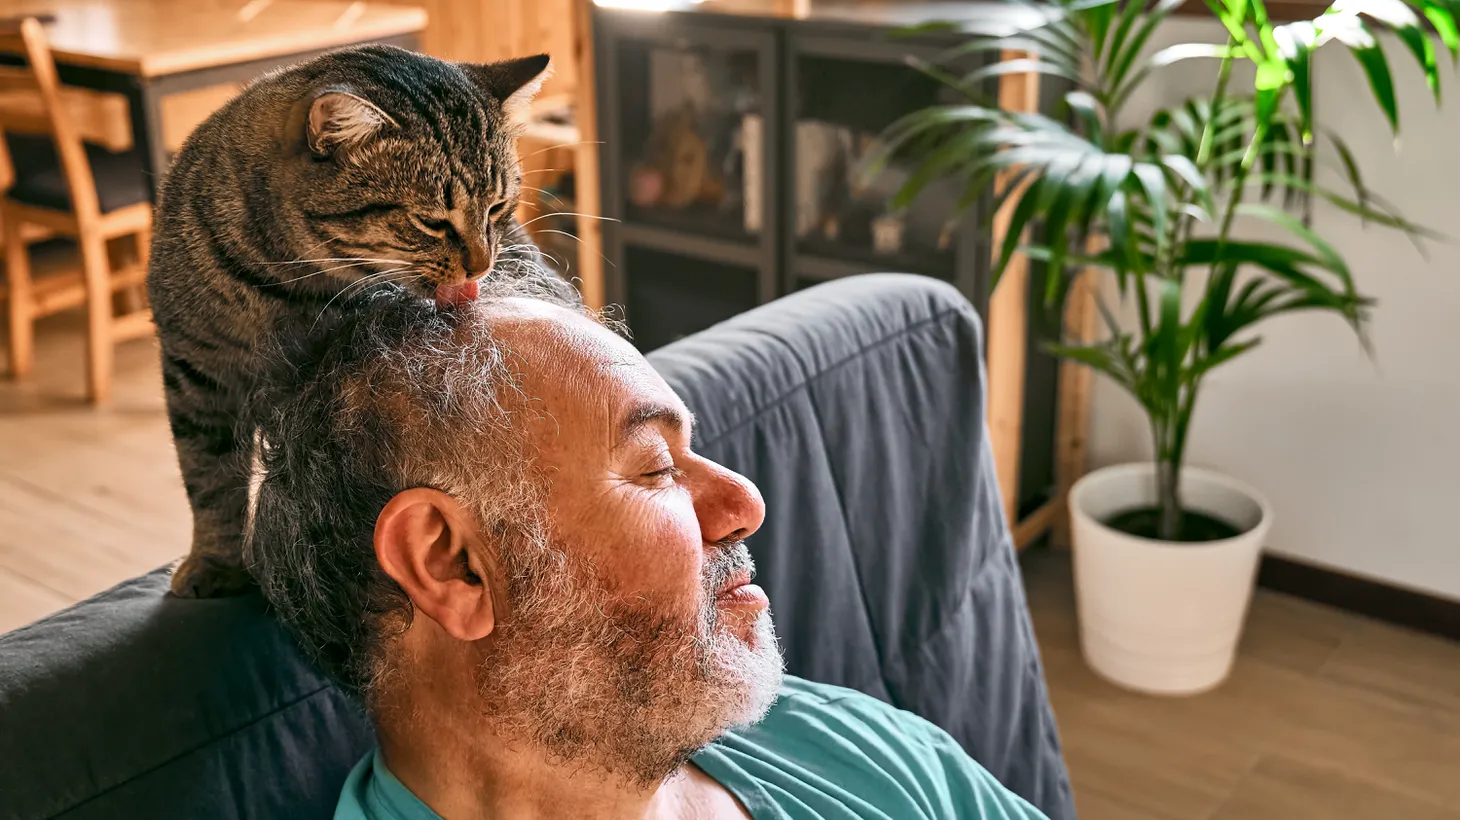 “Cats are as good a predator as there is on the planet,” says evolutionary biologist and author of The Cat’s Meow Jonathan Losos. Their appeal as pets, he says, “is that you've got a little bit of the Serengeti in your own living room.”